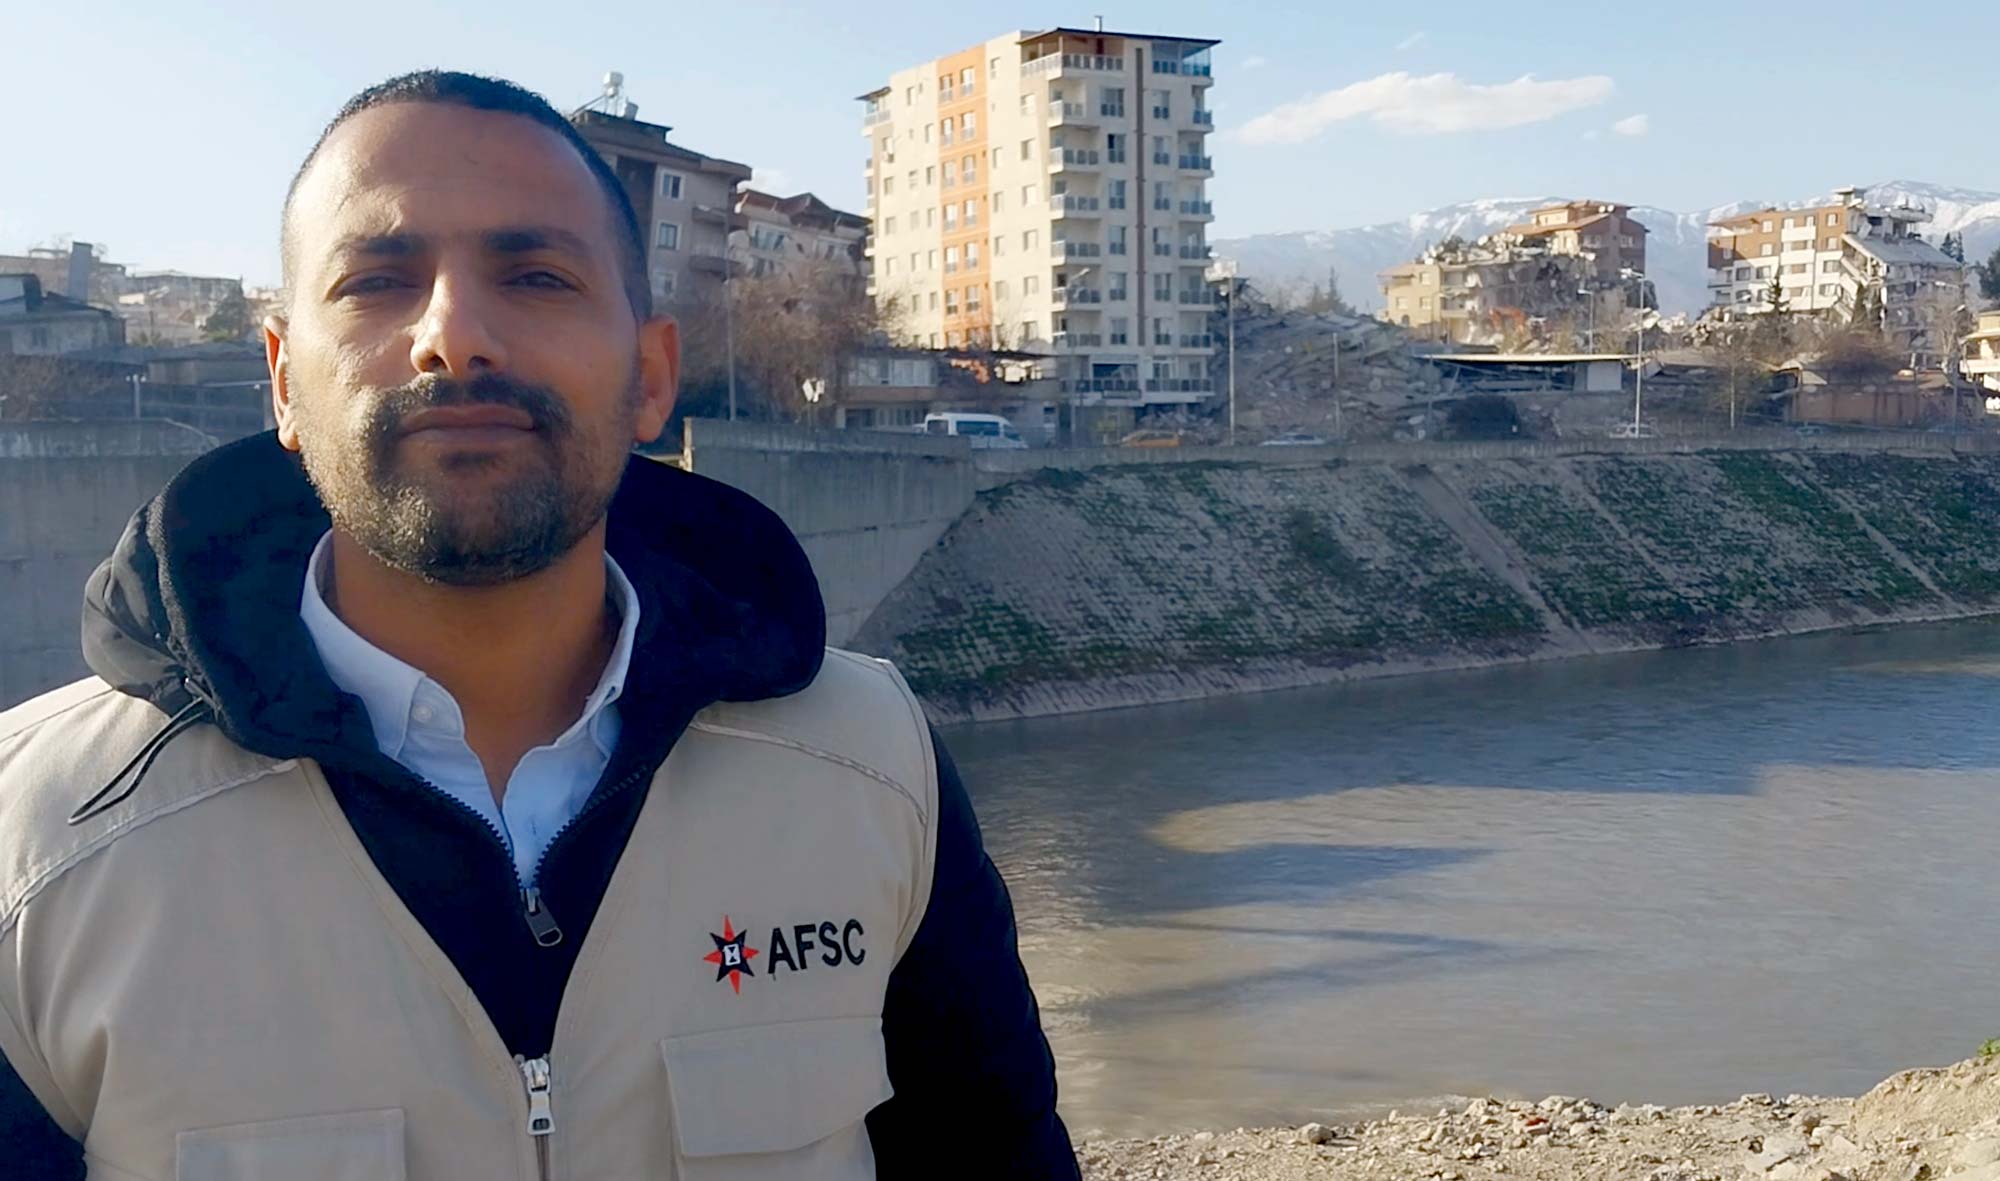 A man wearing an AFSC vest looks at the camera across a river from buildings damaged and destroyed by the earthquake